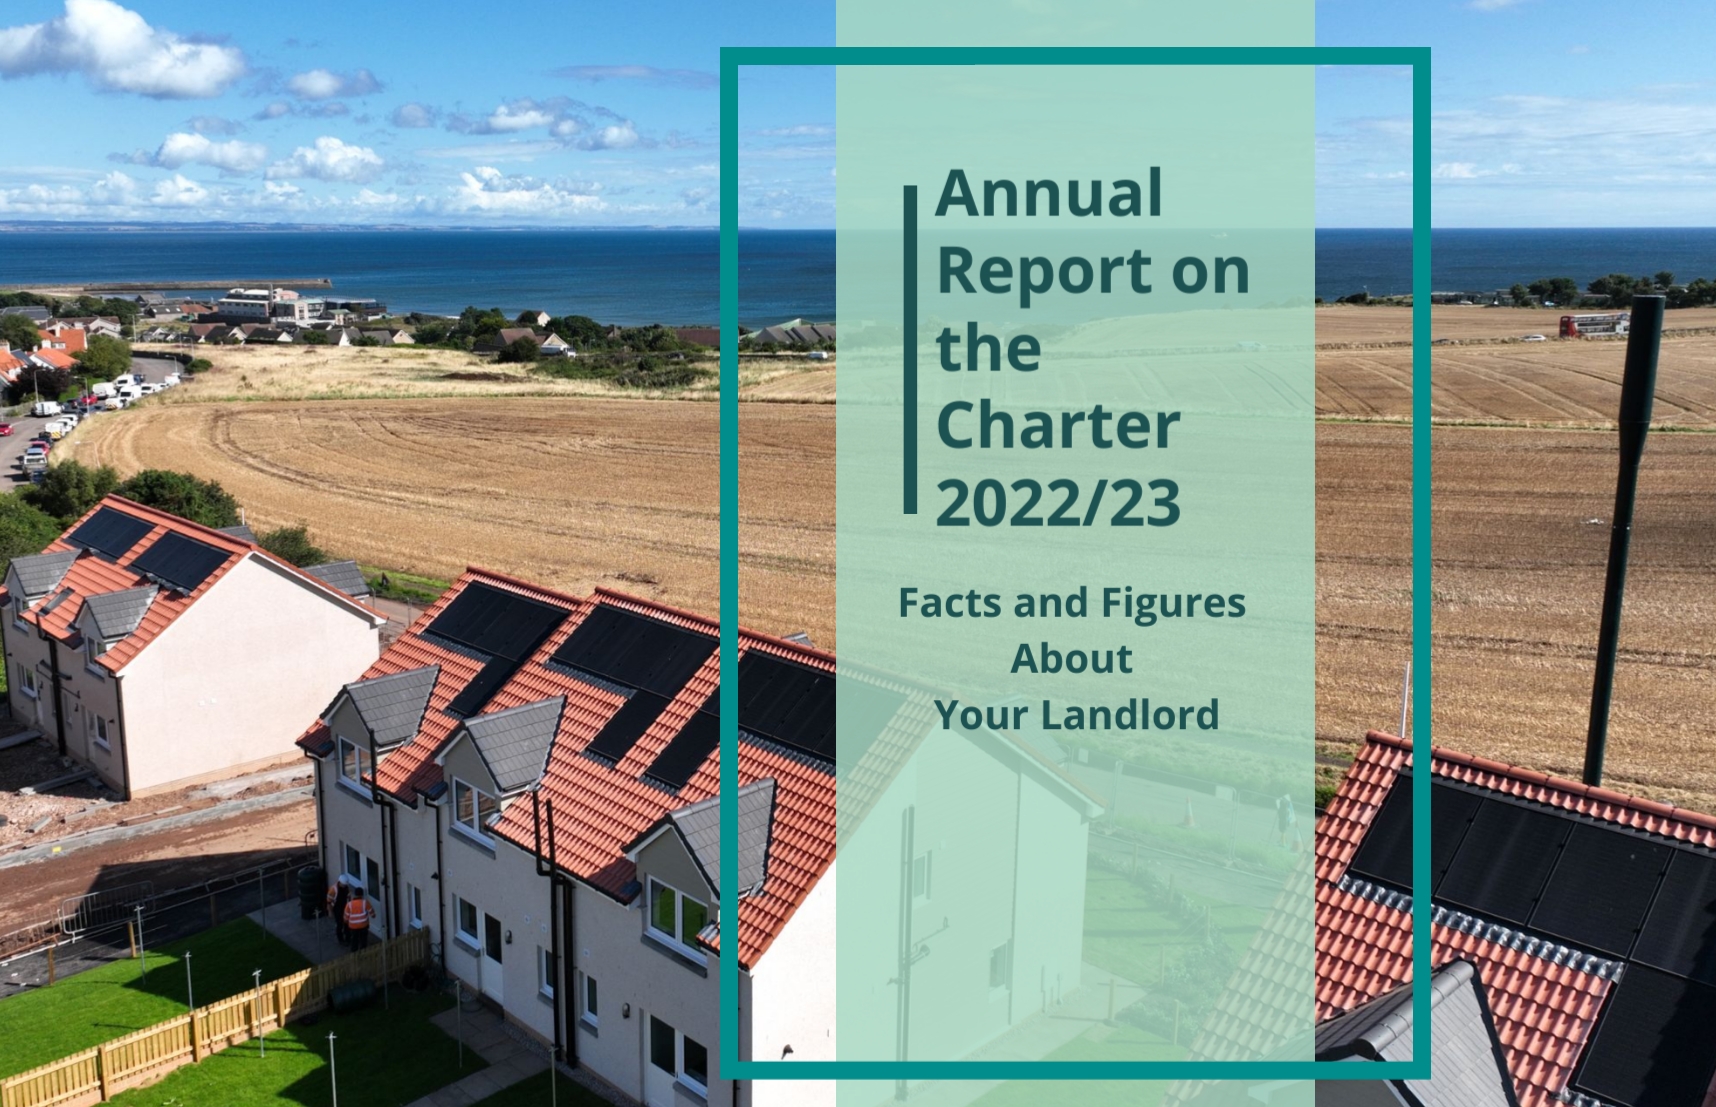 Annual Report On The Charter 2022/23